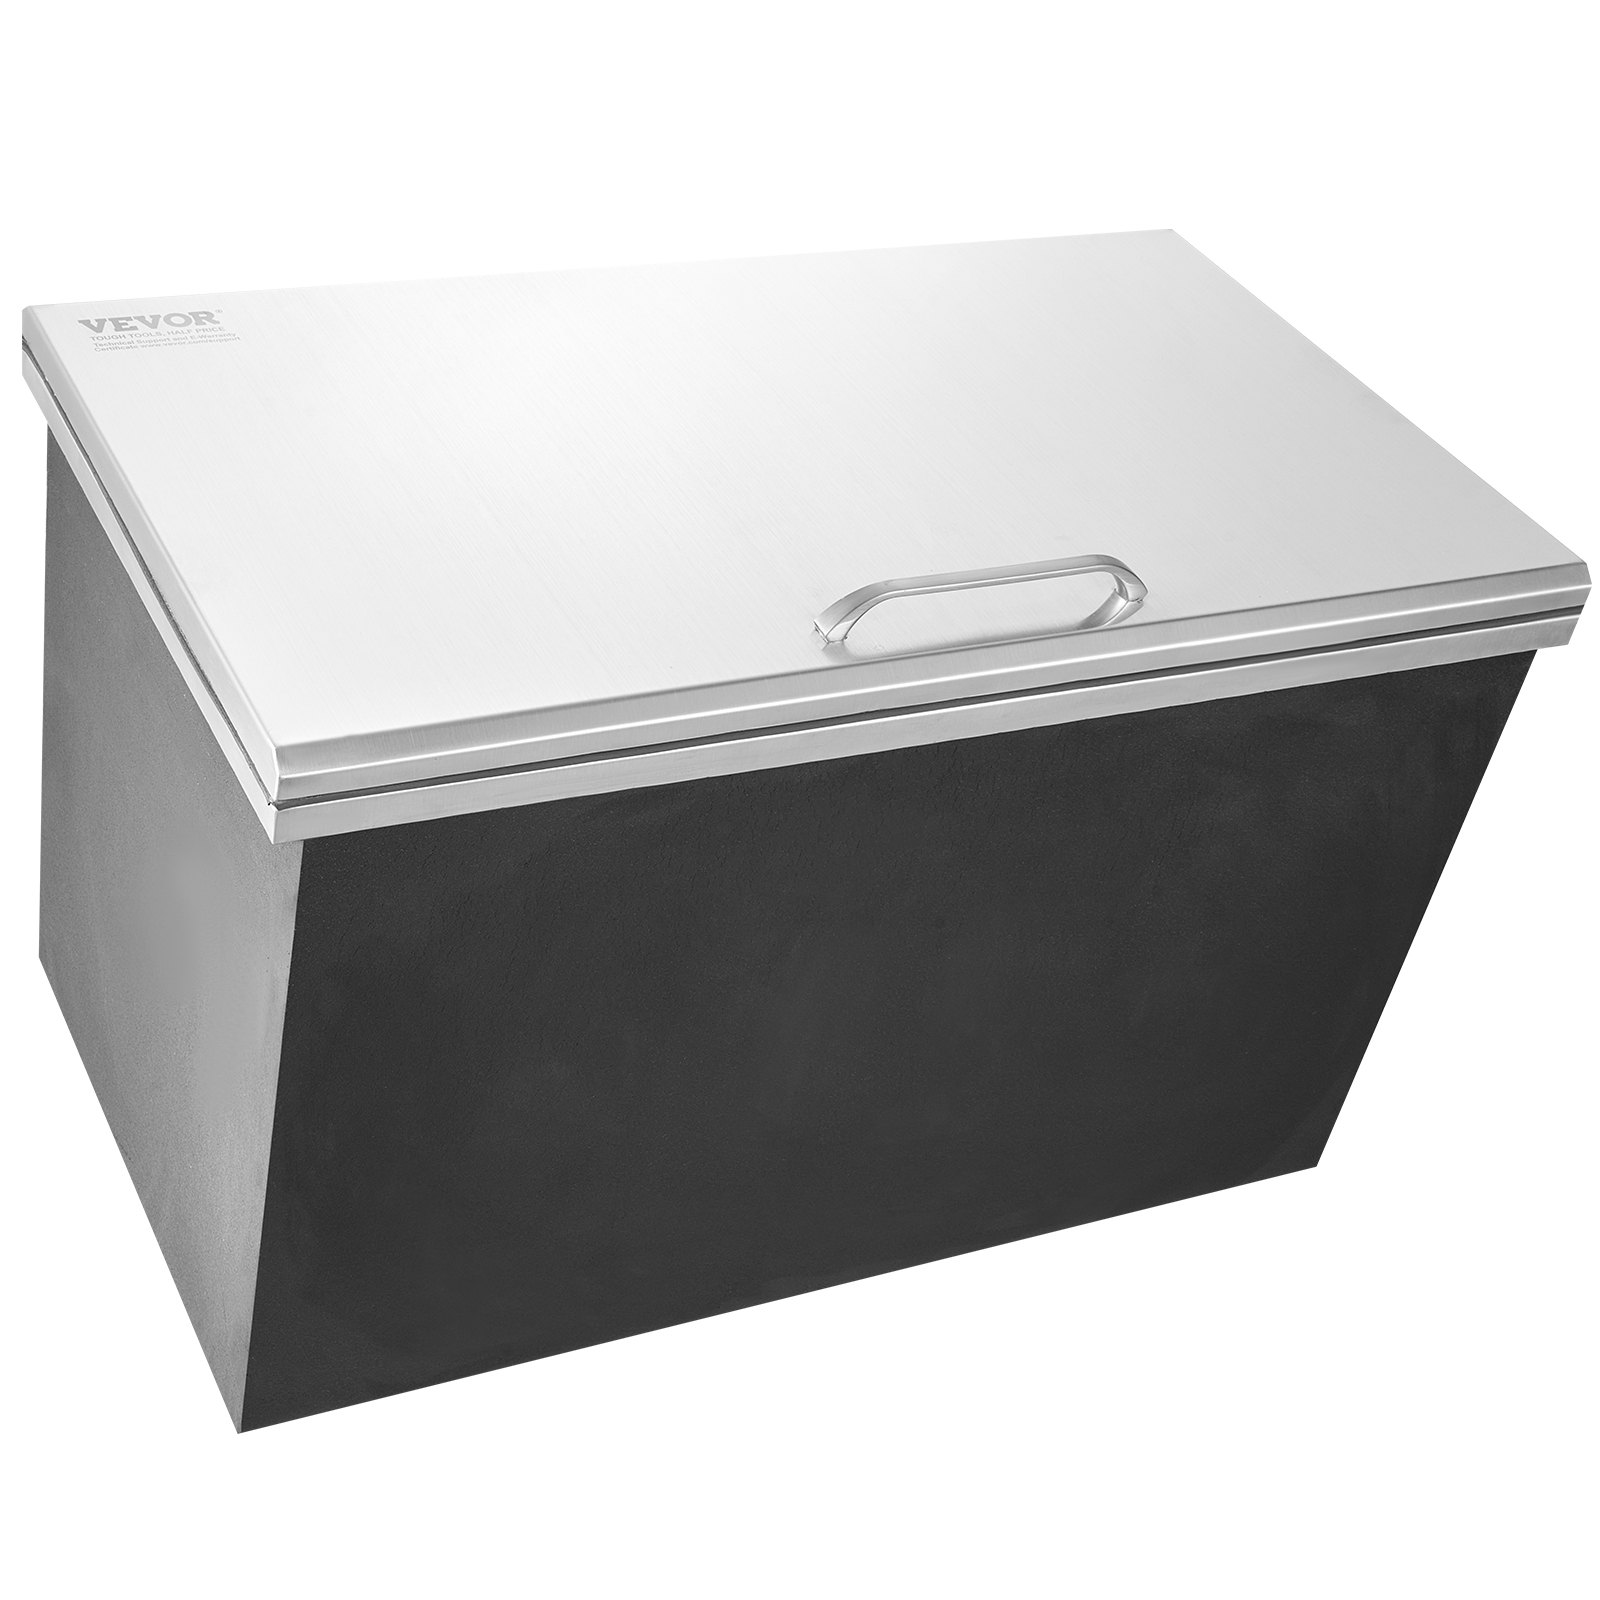 VEVOR Drop in Ice Chest, 24"L x 20"W x 15"H Stainless Steel Ice Cooler, Commercial Ice Bin with Hinged Cover, 40 qt Outdoor Kitchen Ice Bar, Drain-pipe and Drain Plug Included, for Cold Wine Beer, Goodies N Stuff